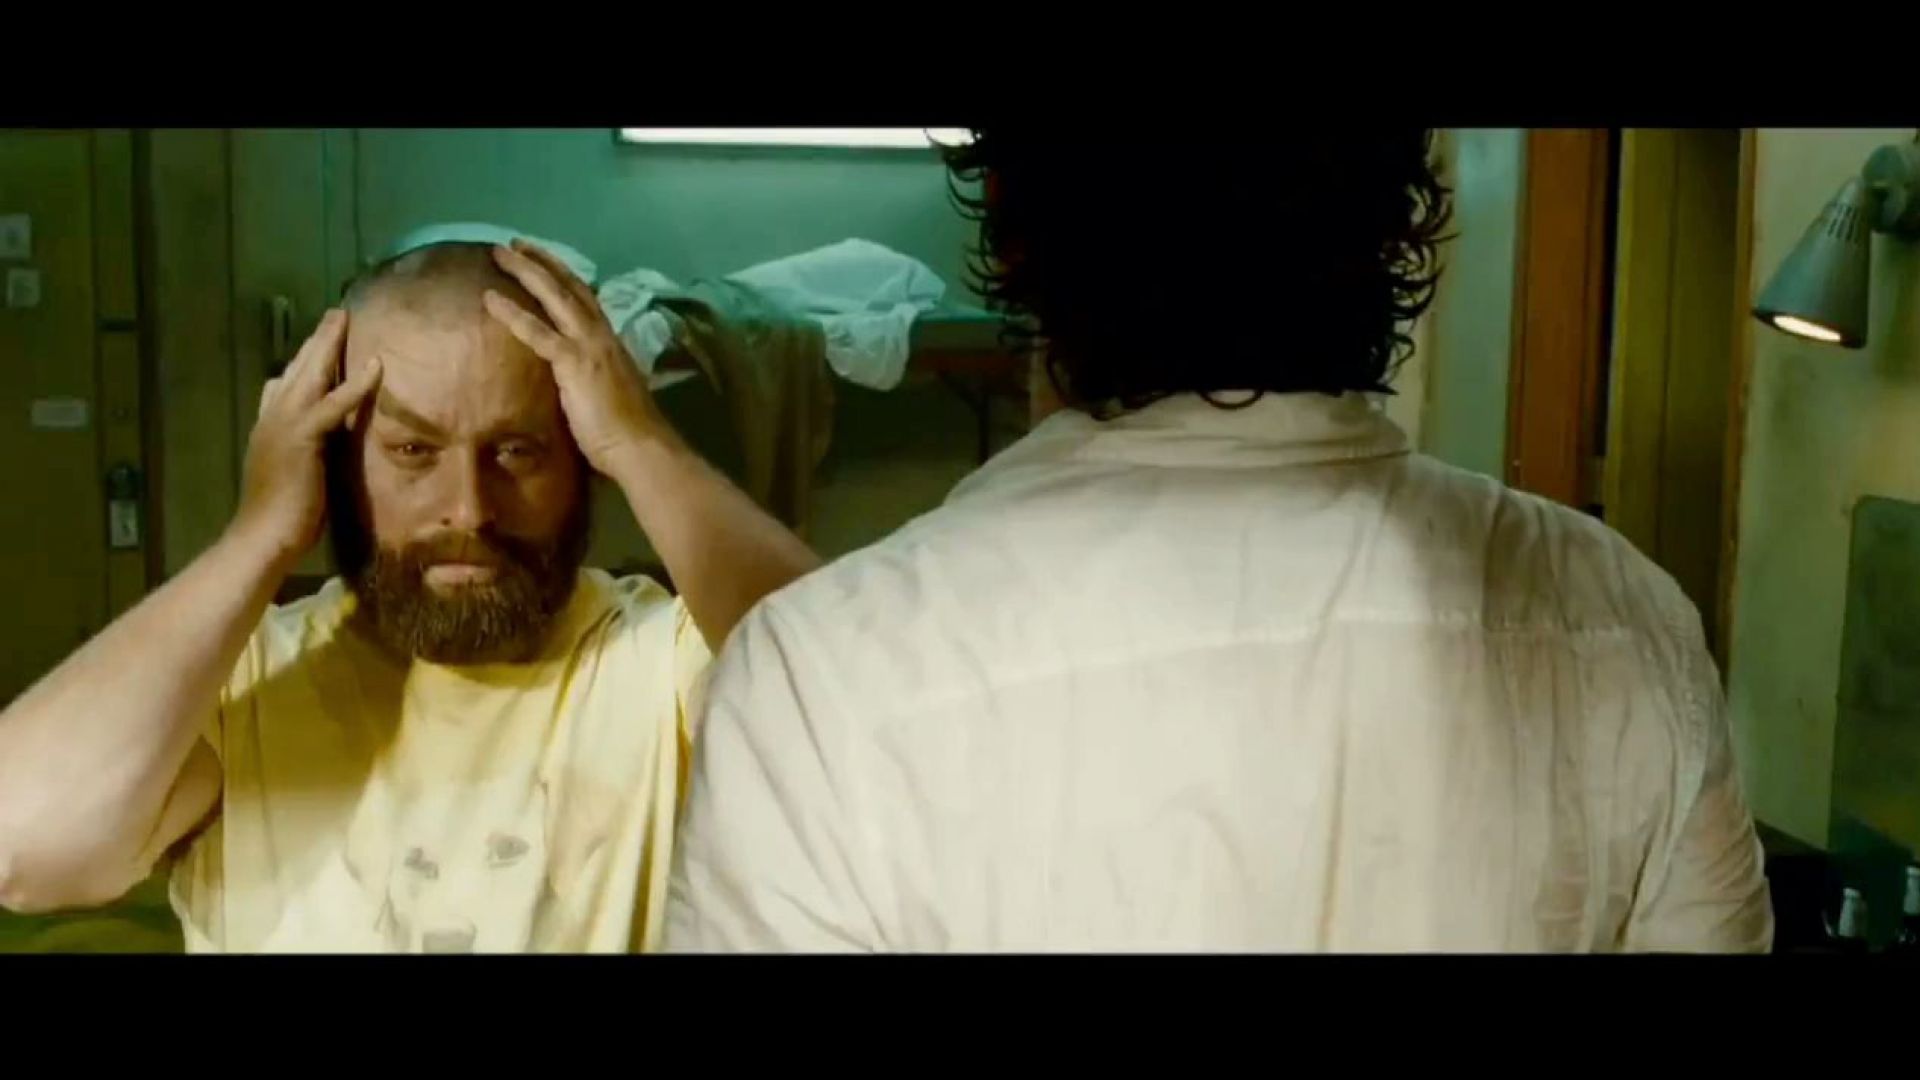 Your hair is gone, The Hangover 2